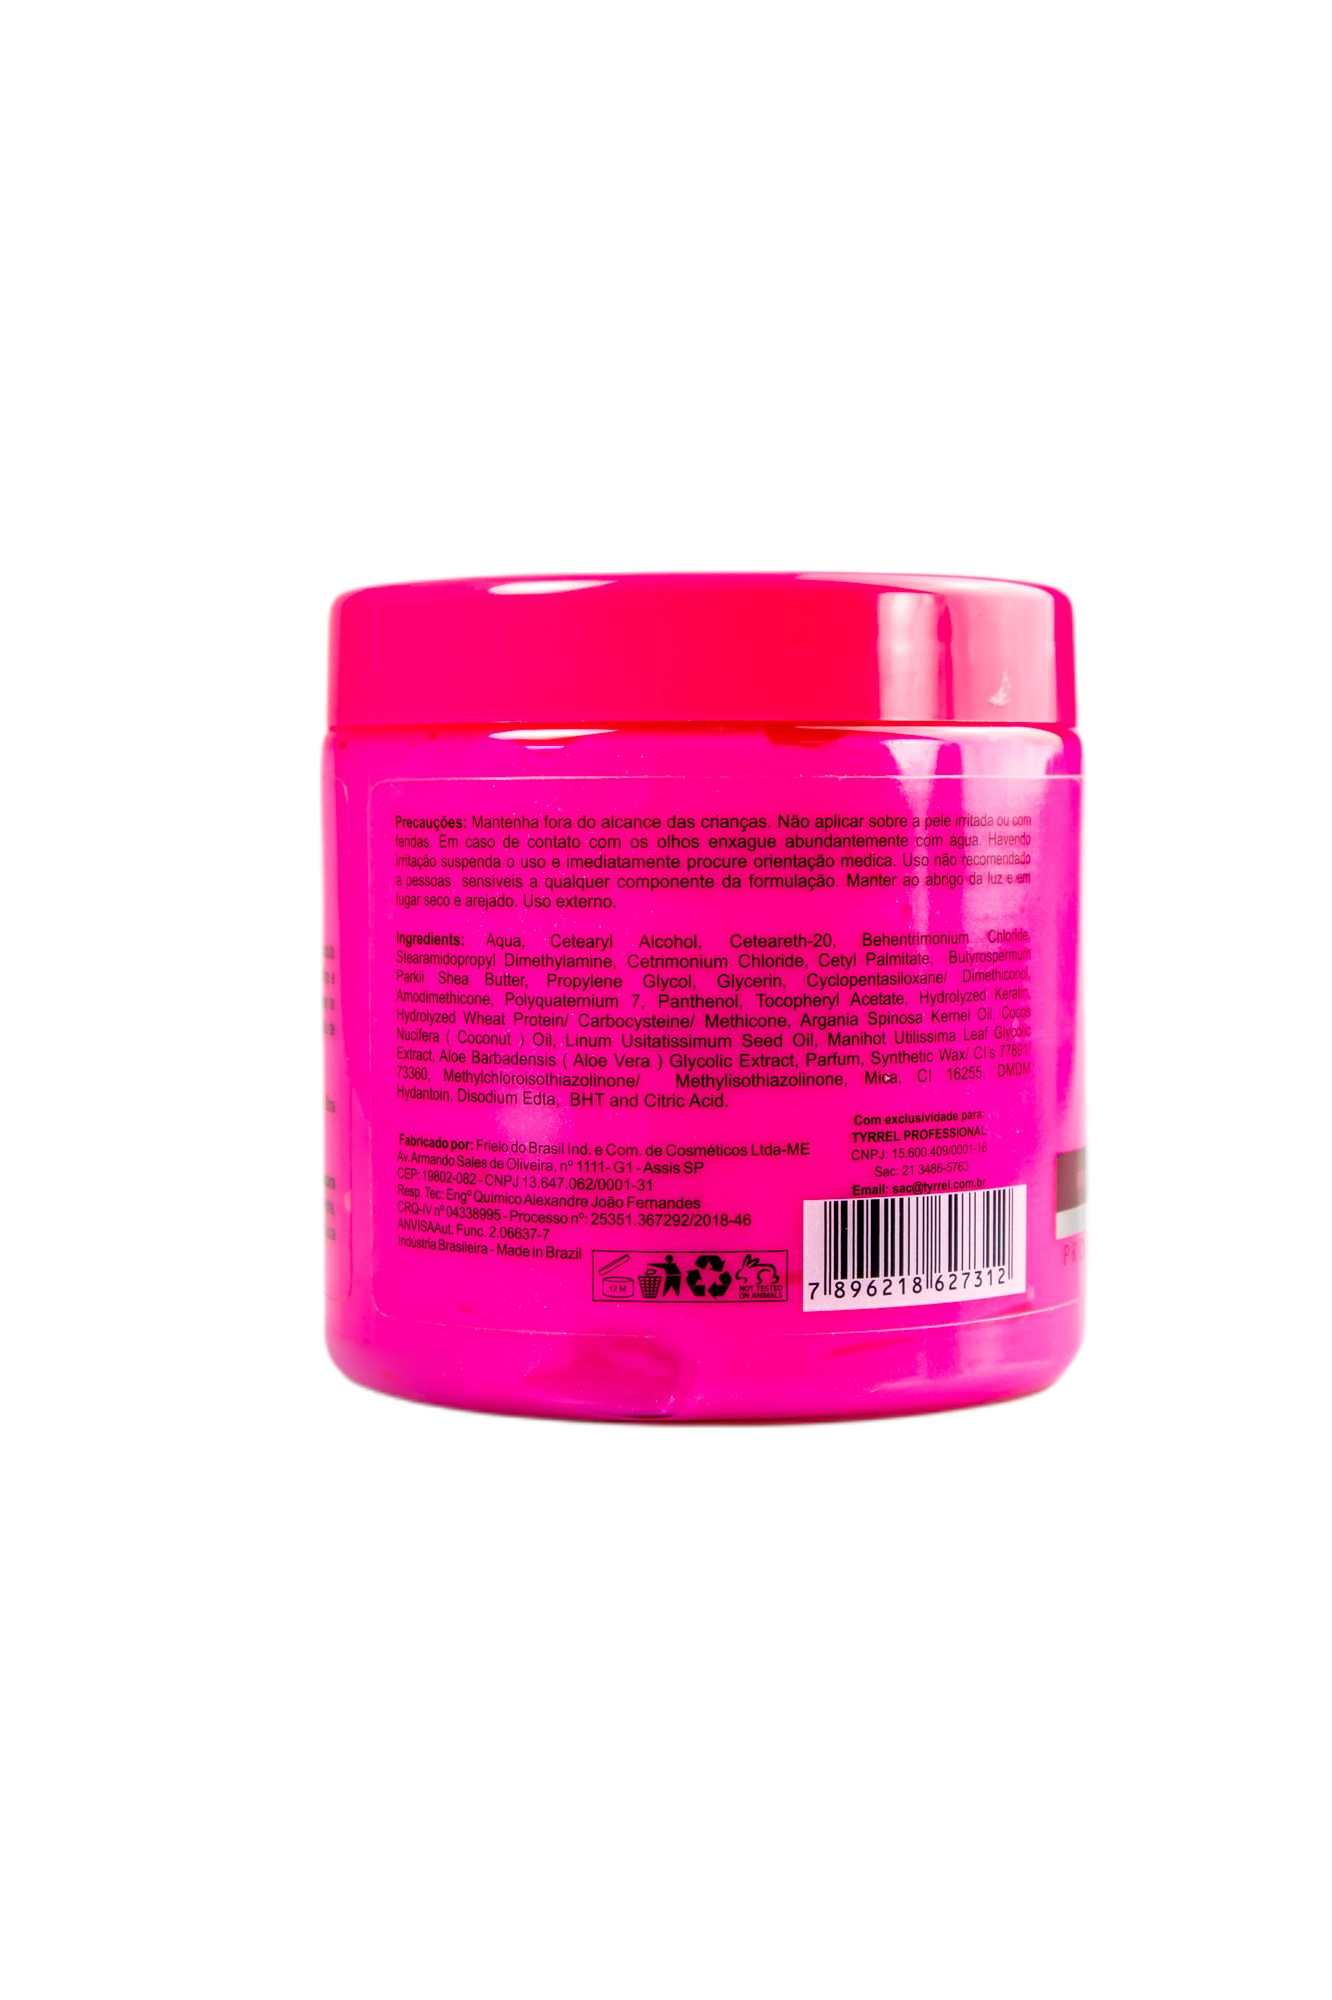 Tyrrel Hair Mask Mass Replacement Maxxi Therapy Luxury Nutrition Treatment Mask 500g - Tyrrel